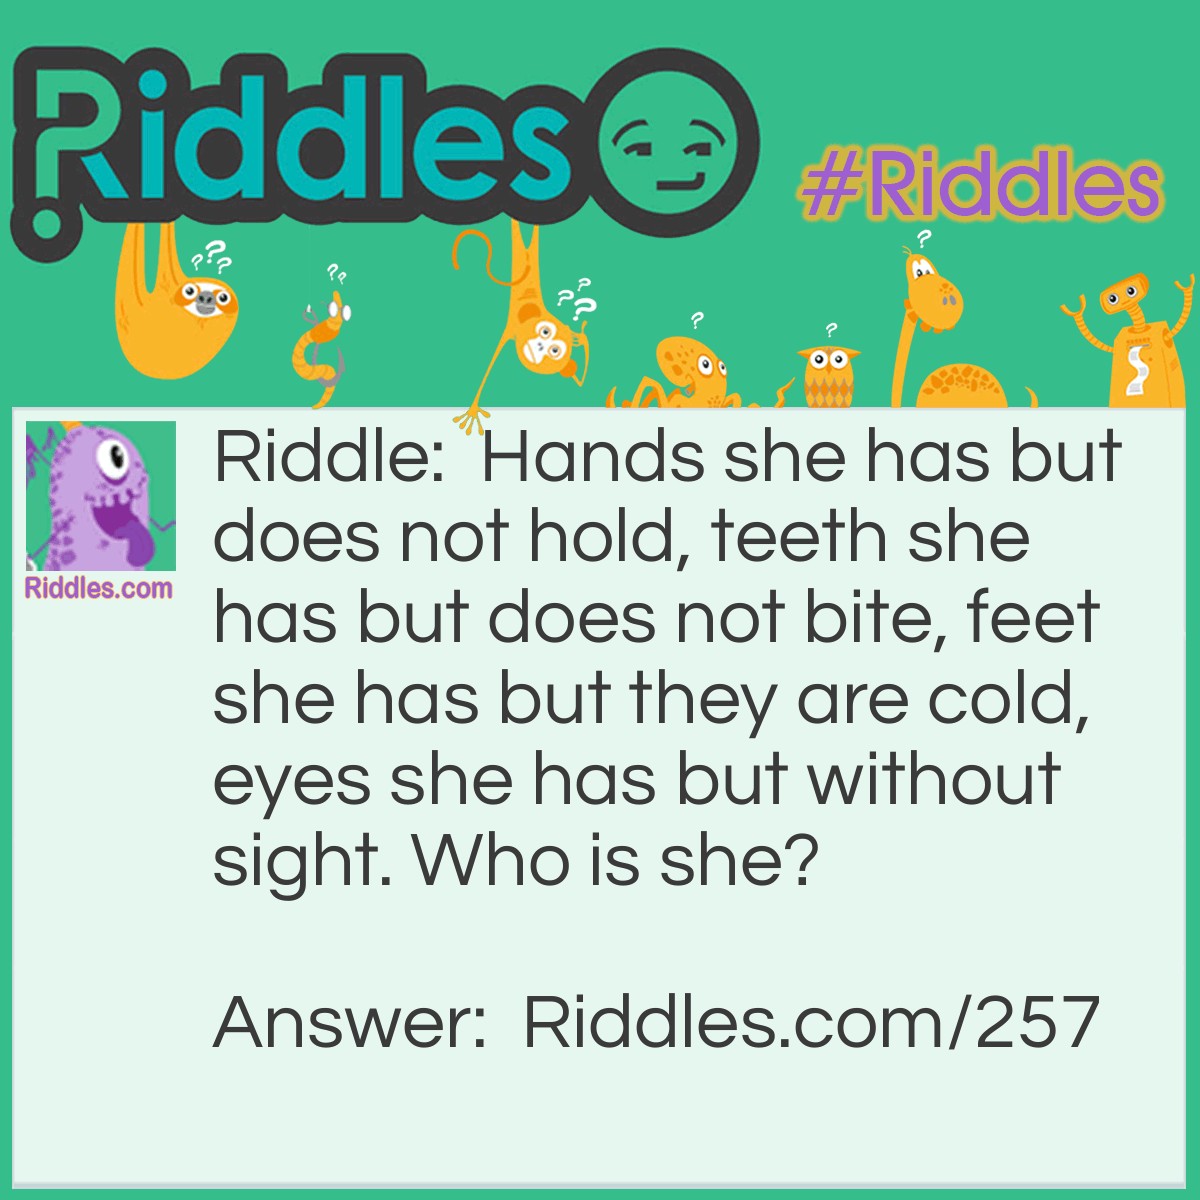 Riddle: Hands she has but does not hold, teeth she has but does not bite, feet she has but they are cold, eyes she has but without sight. Who is she? Answer: A Doll.